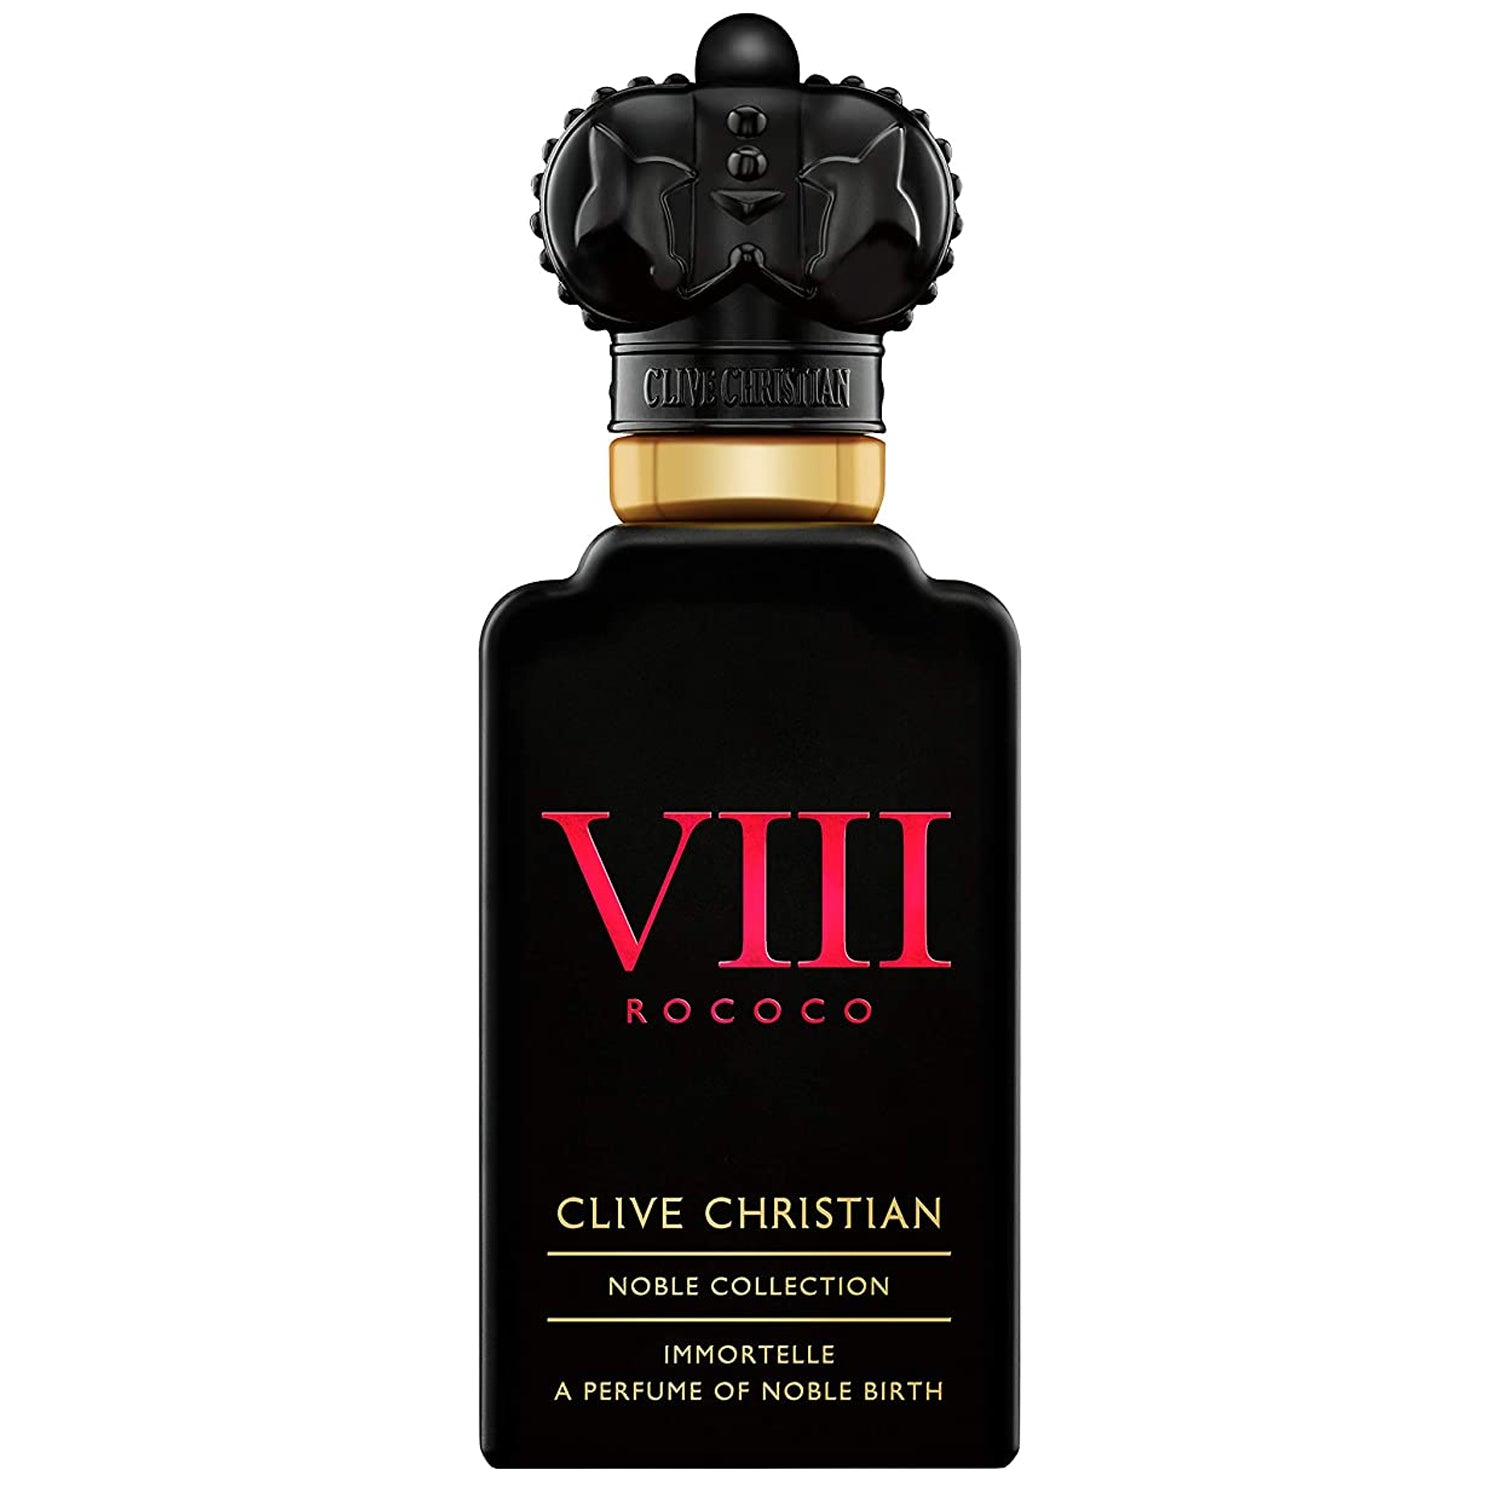 Clive%20Christian%20Noble%20Collection%20VIII%20Rococo%20Immortelle%20Parfum%20for%20Men%20-%20Box%20Item